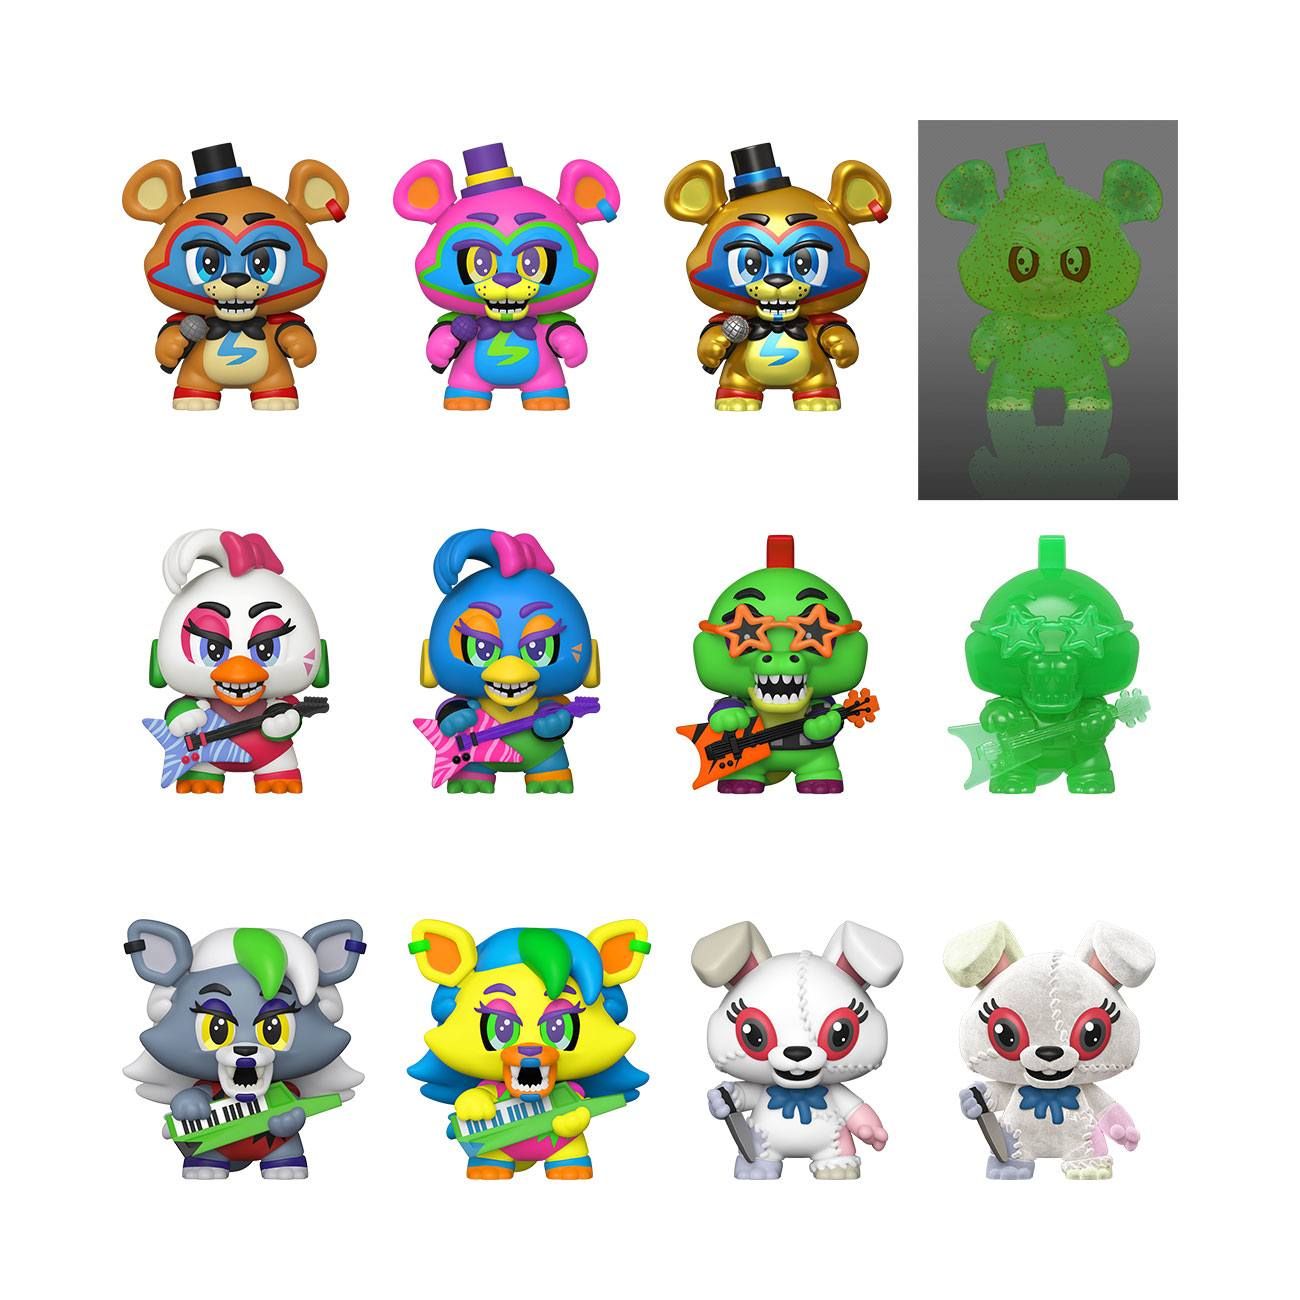 Five Nights at Freddy's Mystery Minis Vinyl Mini Figures 6 cm Display Security Breach (12) Funko